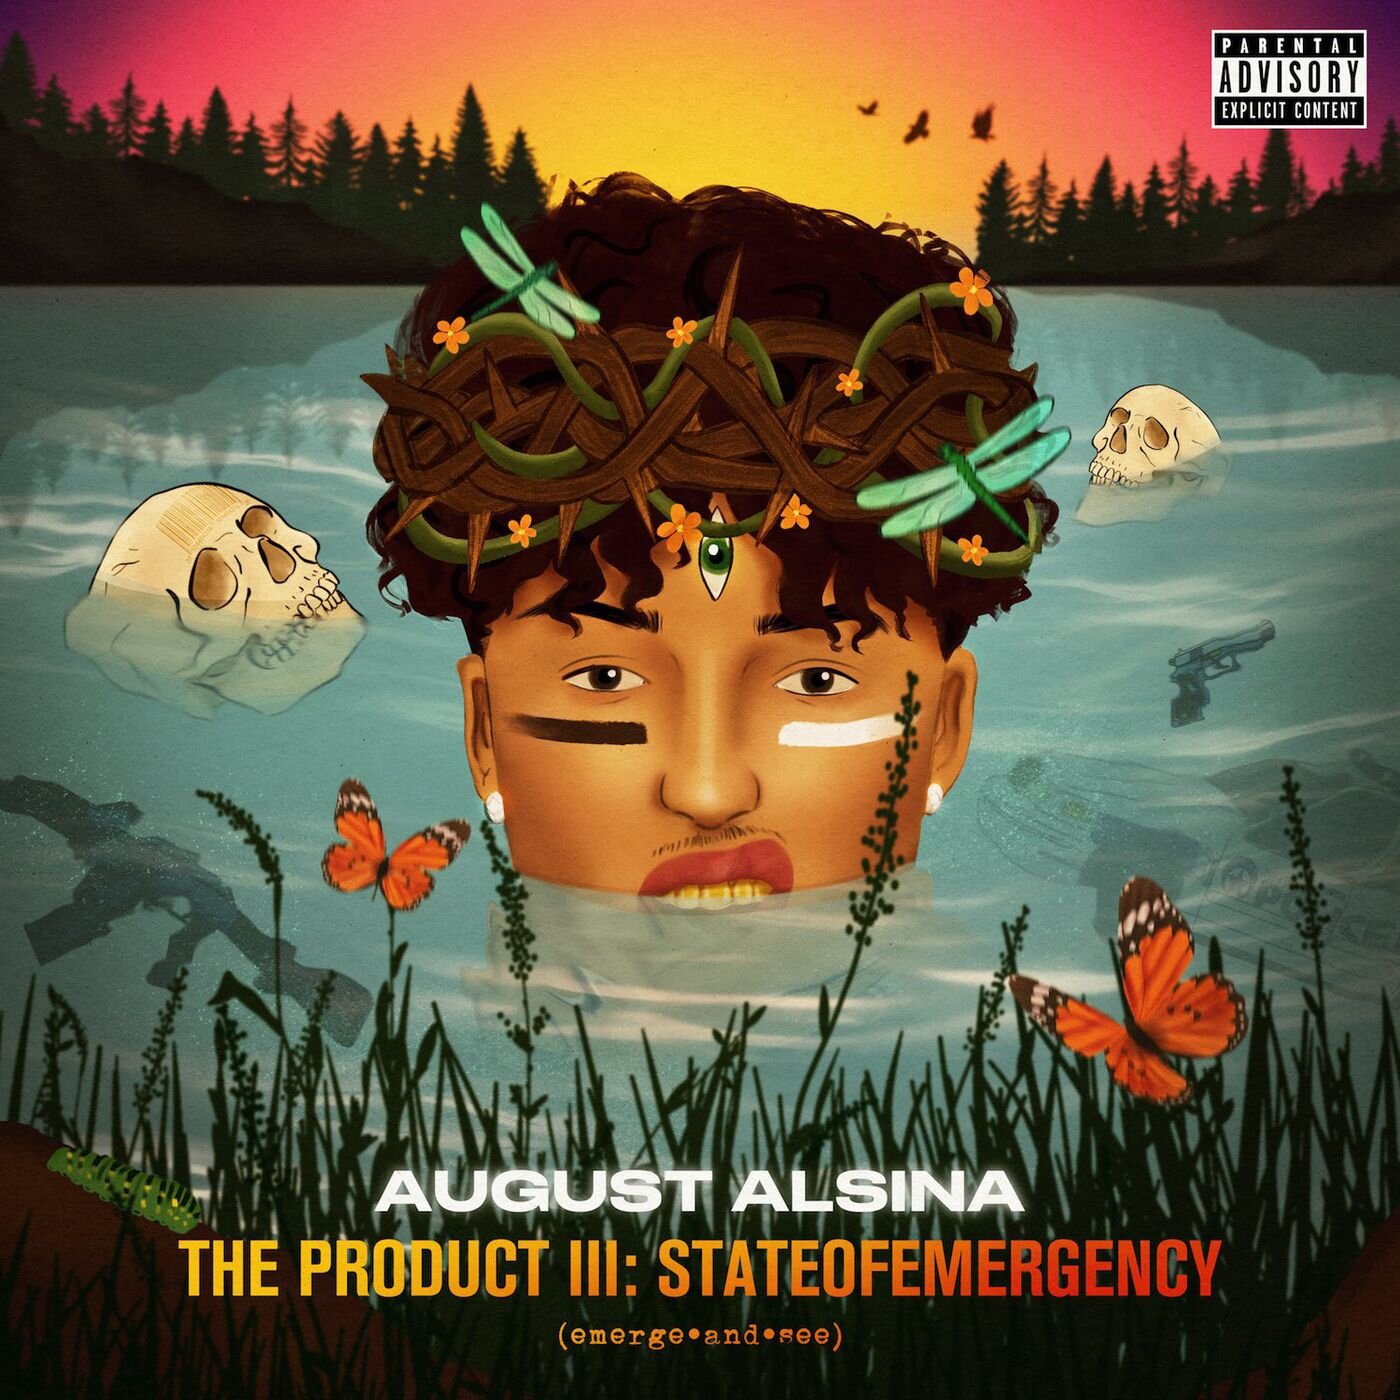 August Alsina "The Product III: StateOfEmergency"